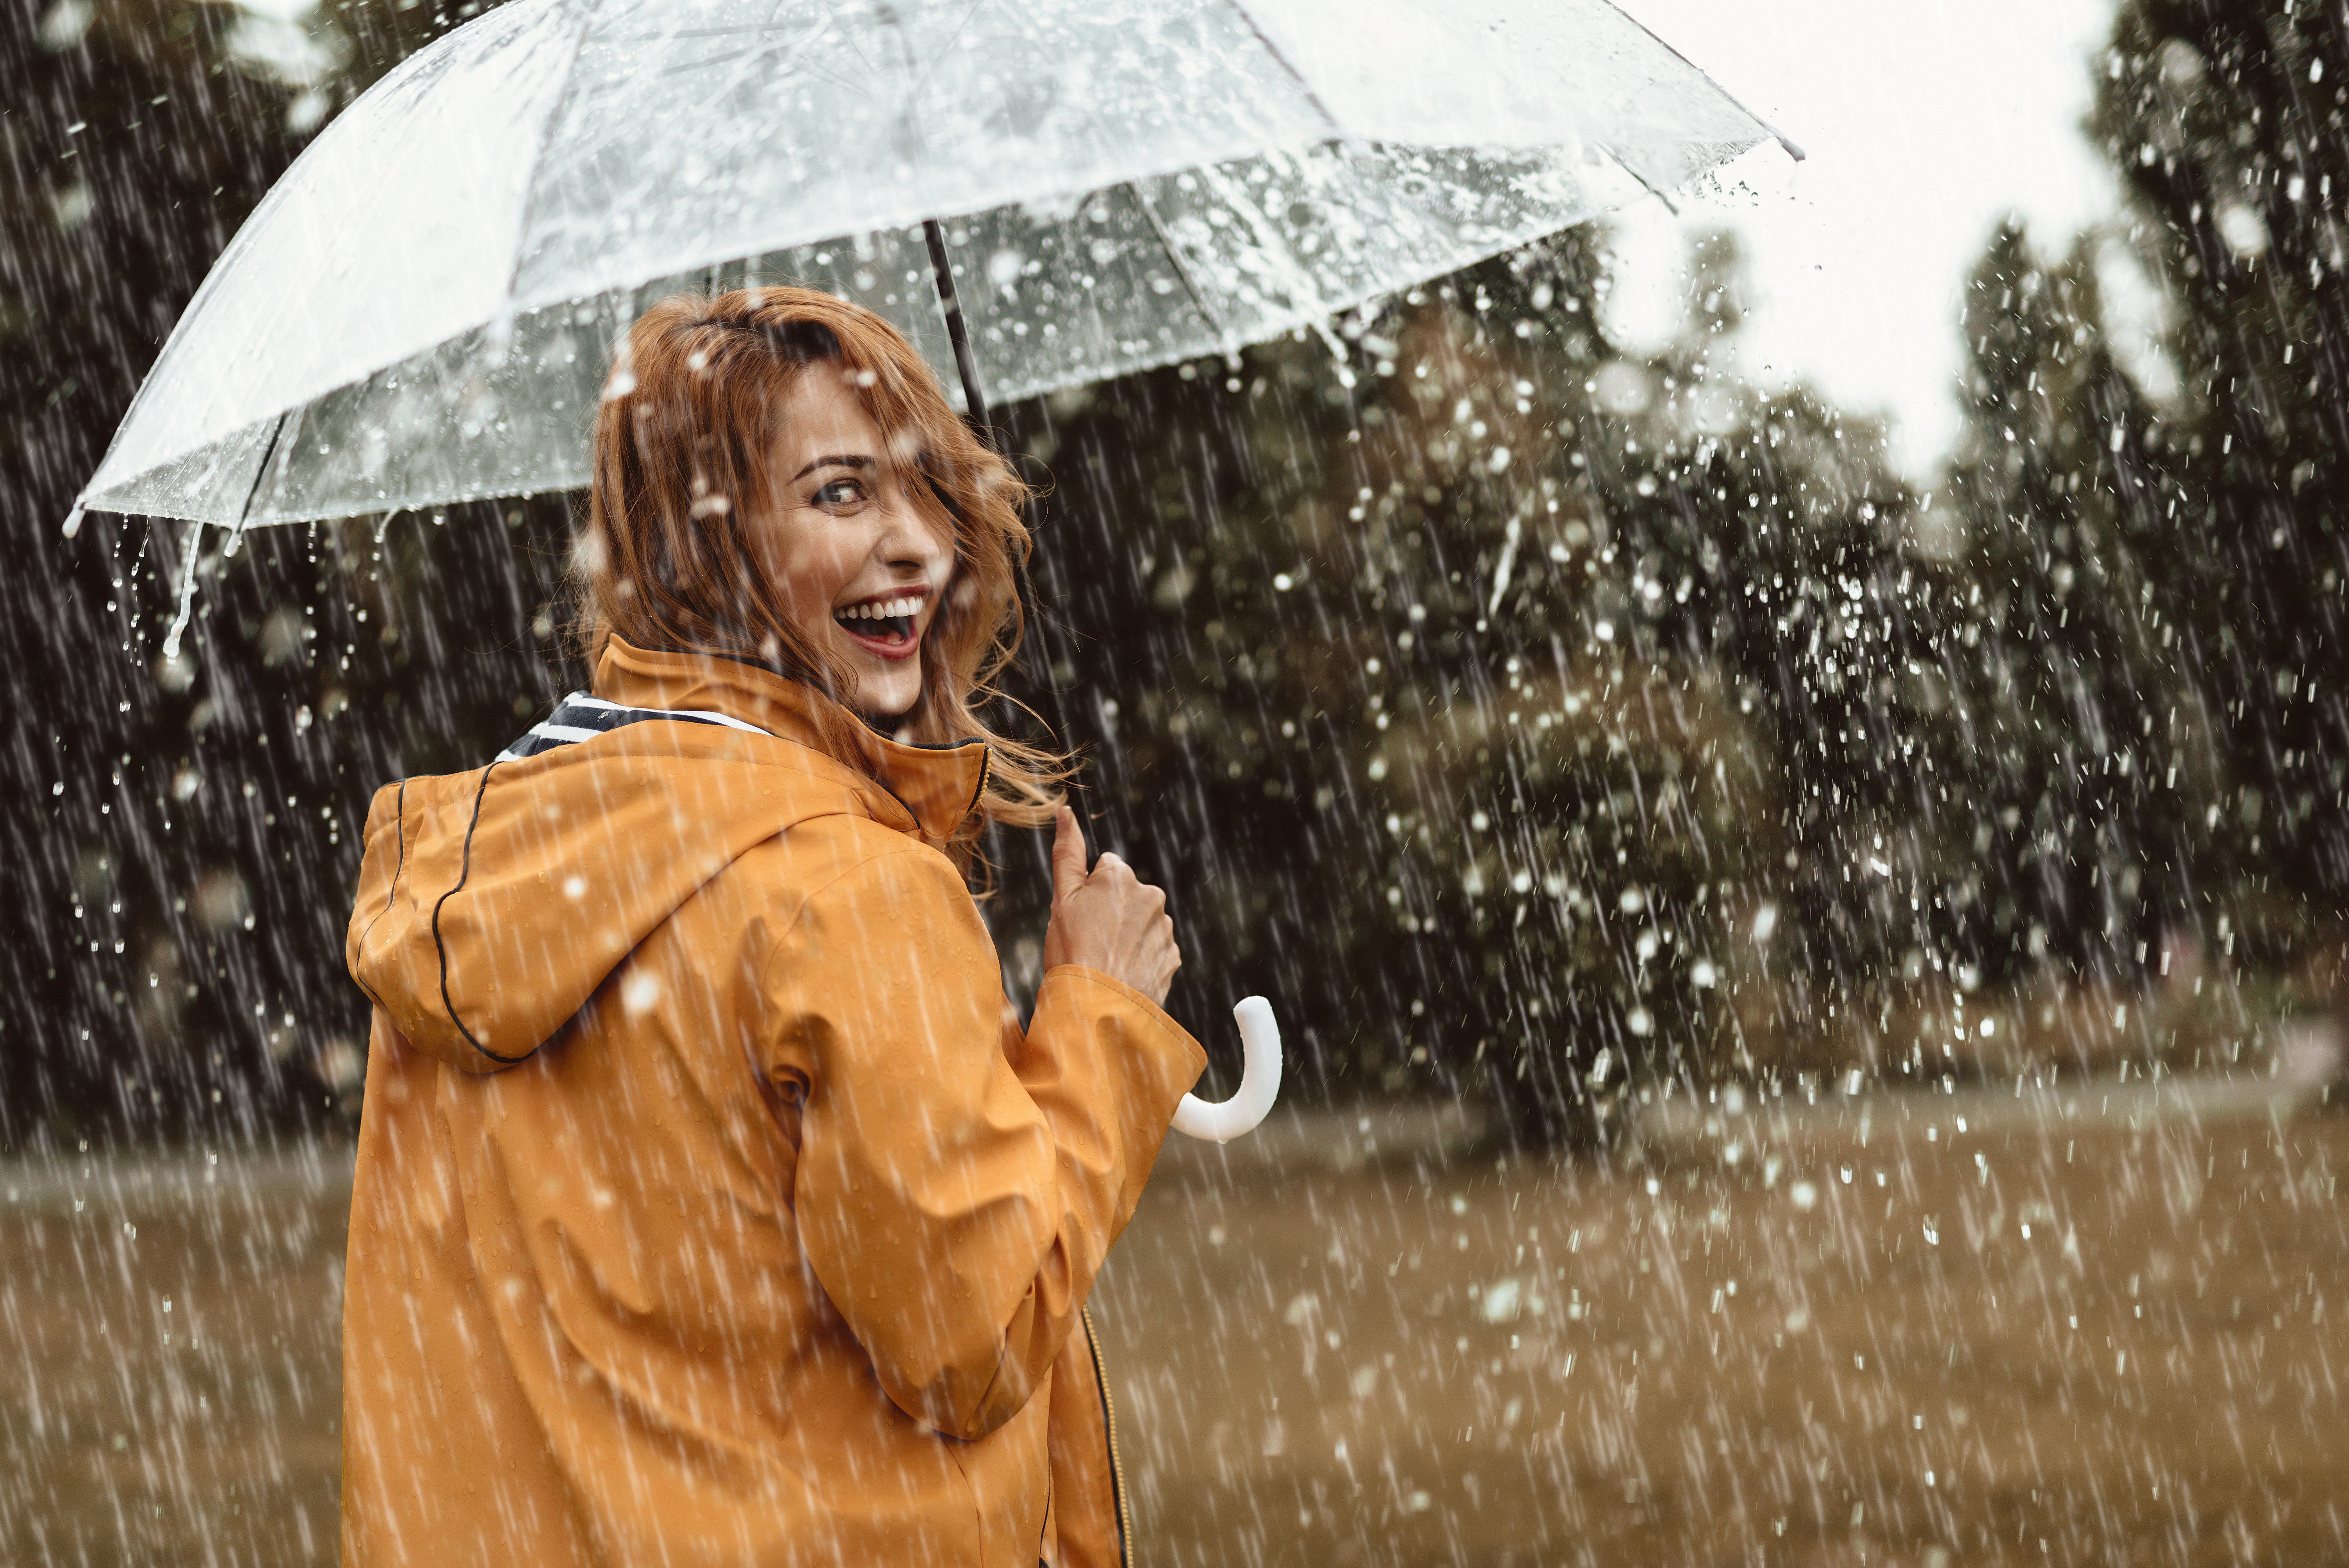 5 Tips To Look After Your Clothes In The Monsoon